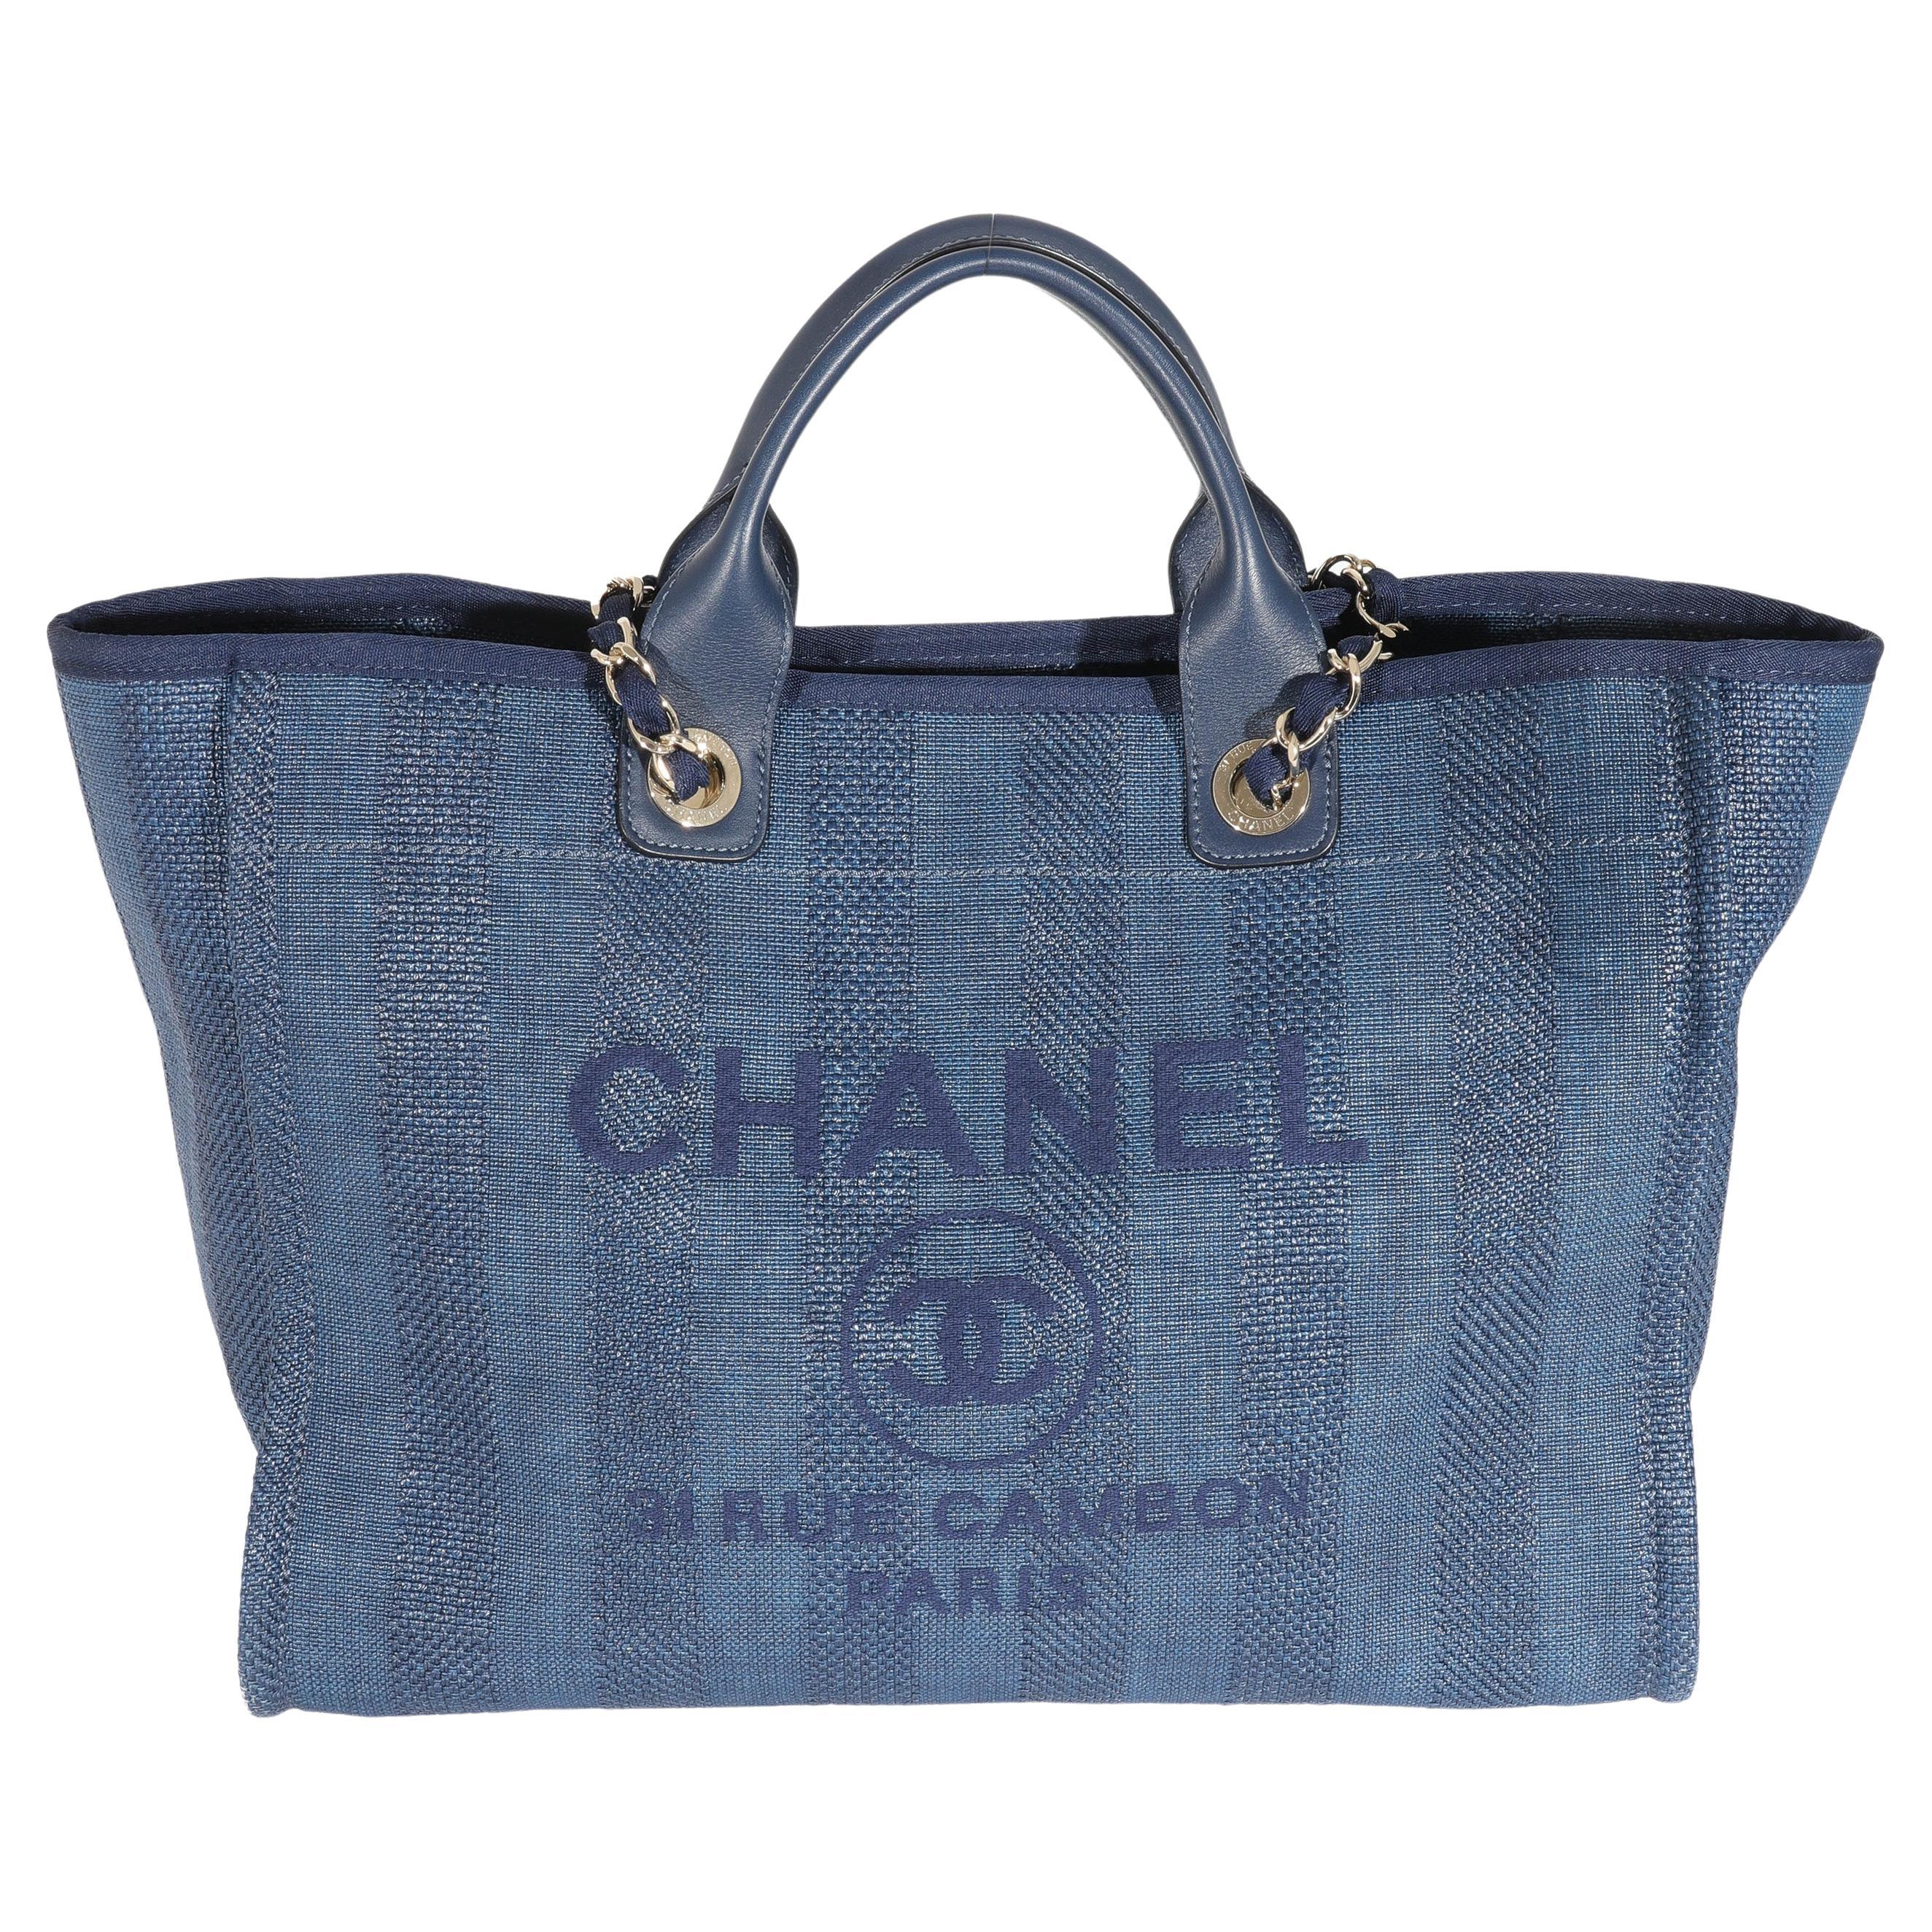 Chanel Striped Navy Mixed Fibres Large Deauville Tote